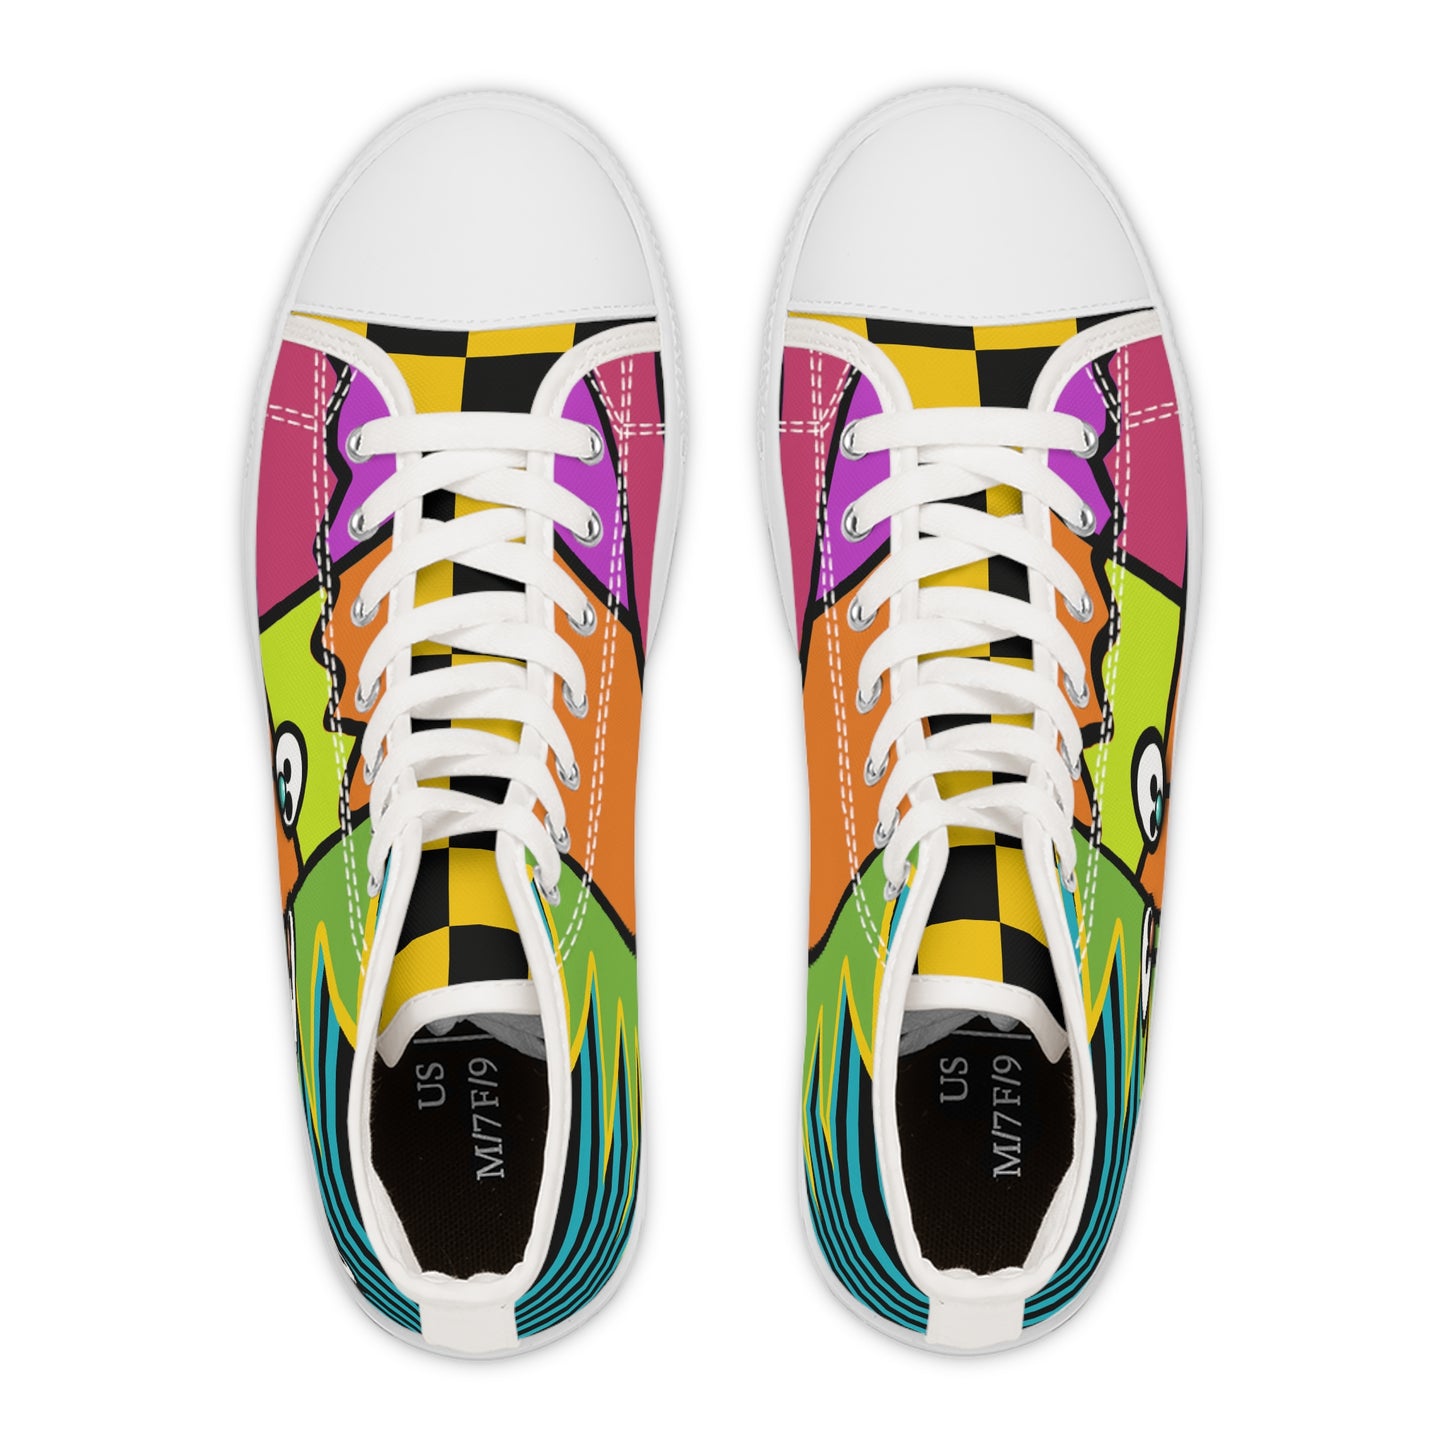 Women's High Top Graphics Sneakers - 10003 US 12 White sole